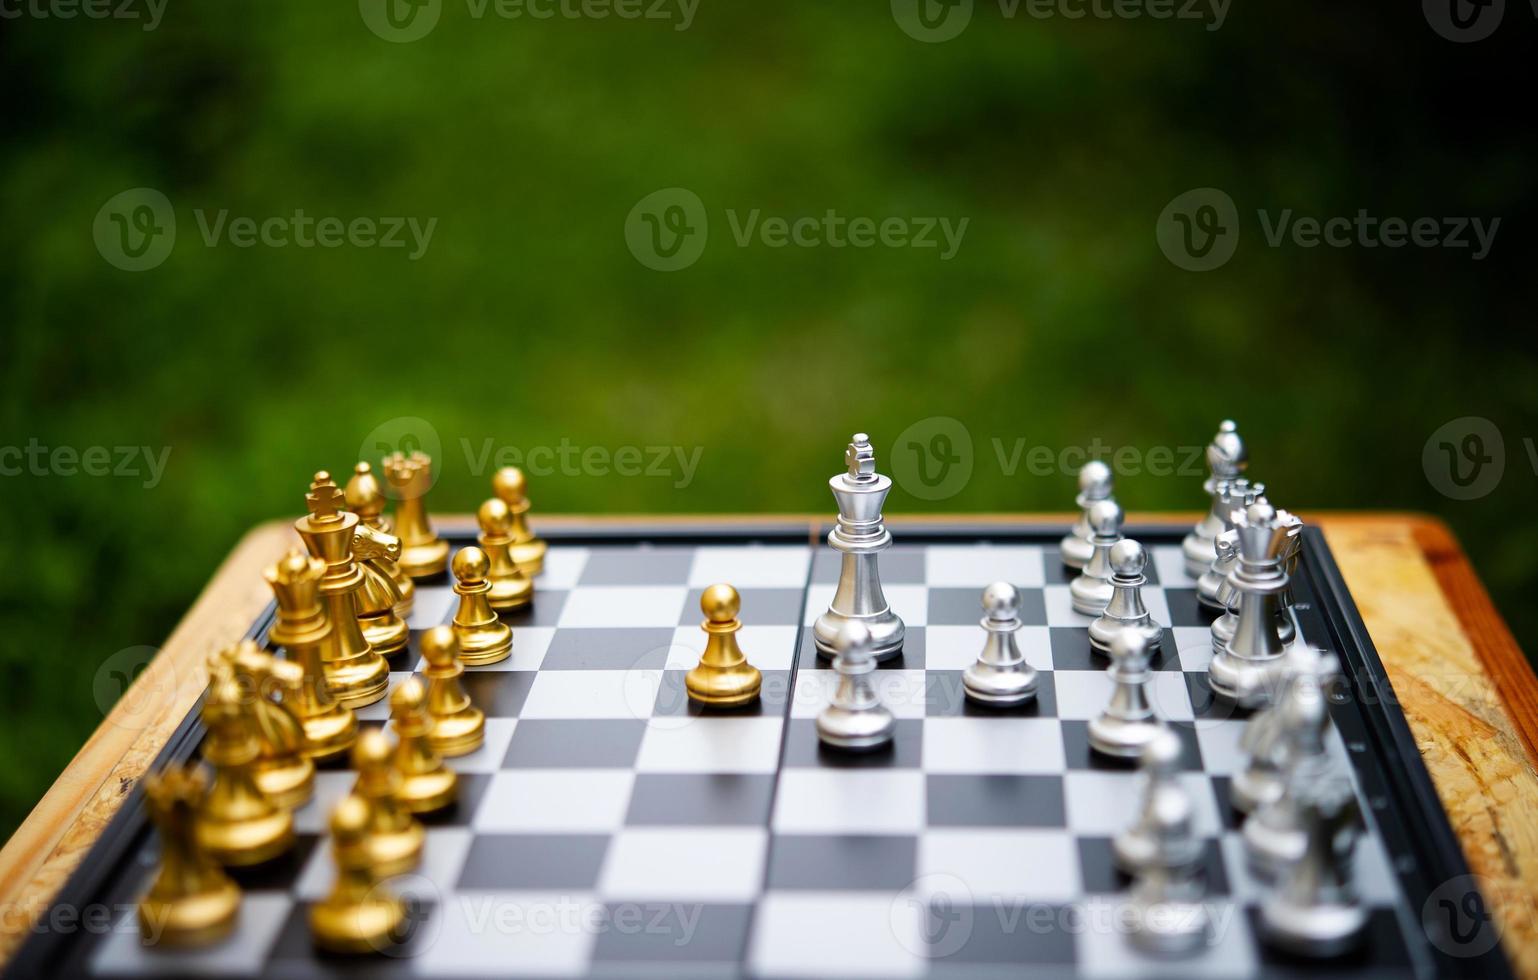 Chess, board games for concepts and contests, and strategies for business success ideas photo